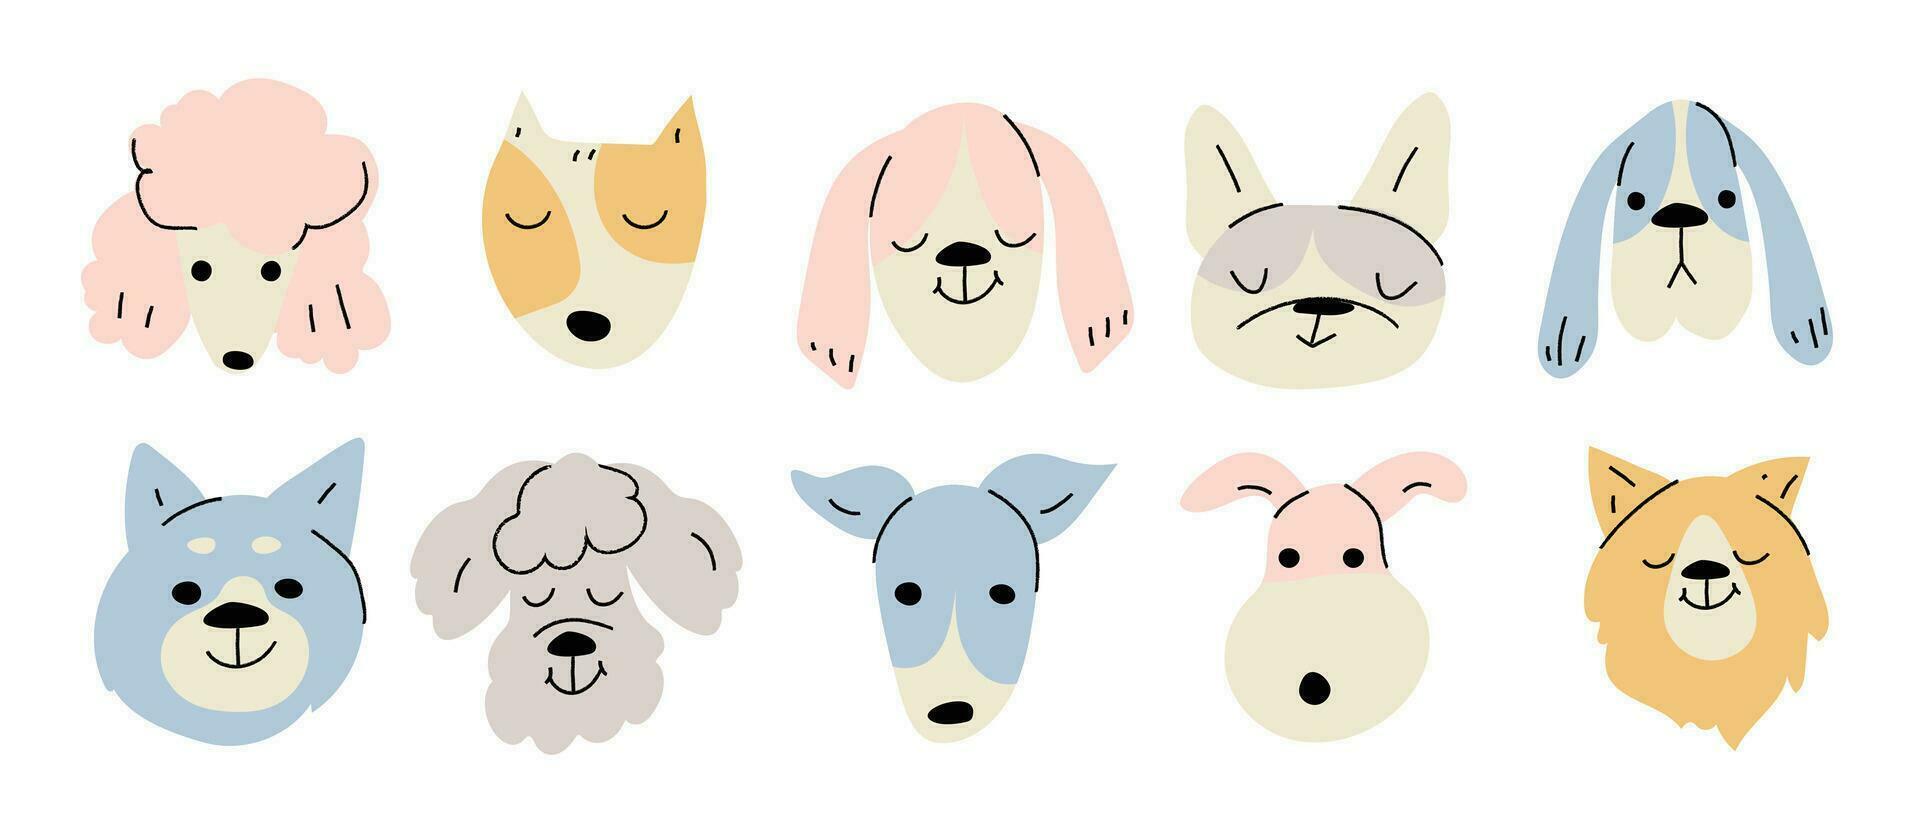 Cute and smile dog heads doodle vector set. Comic happy dog faces character design of different dog breed with flat color isolated on white background. Design illustration for sticker, comic, print.